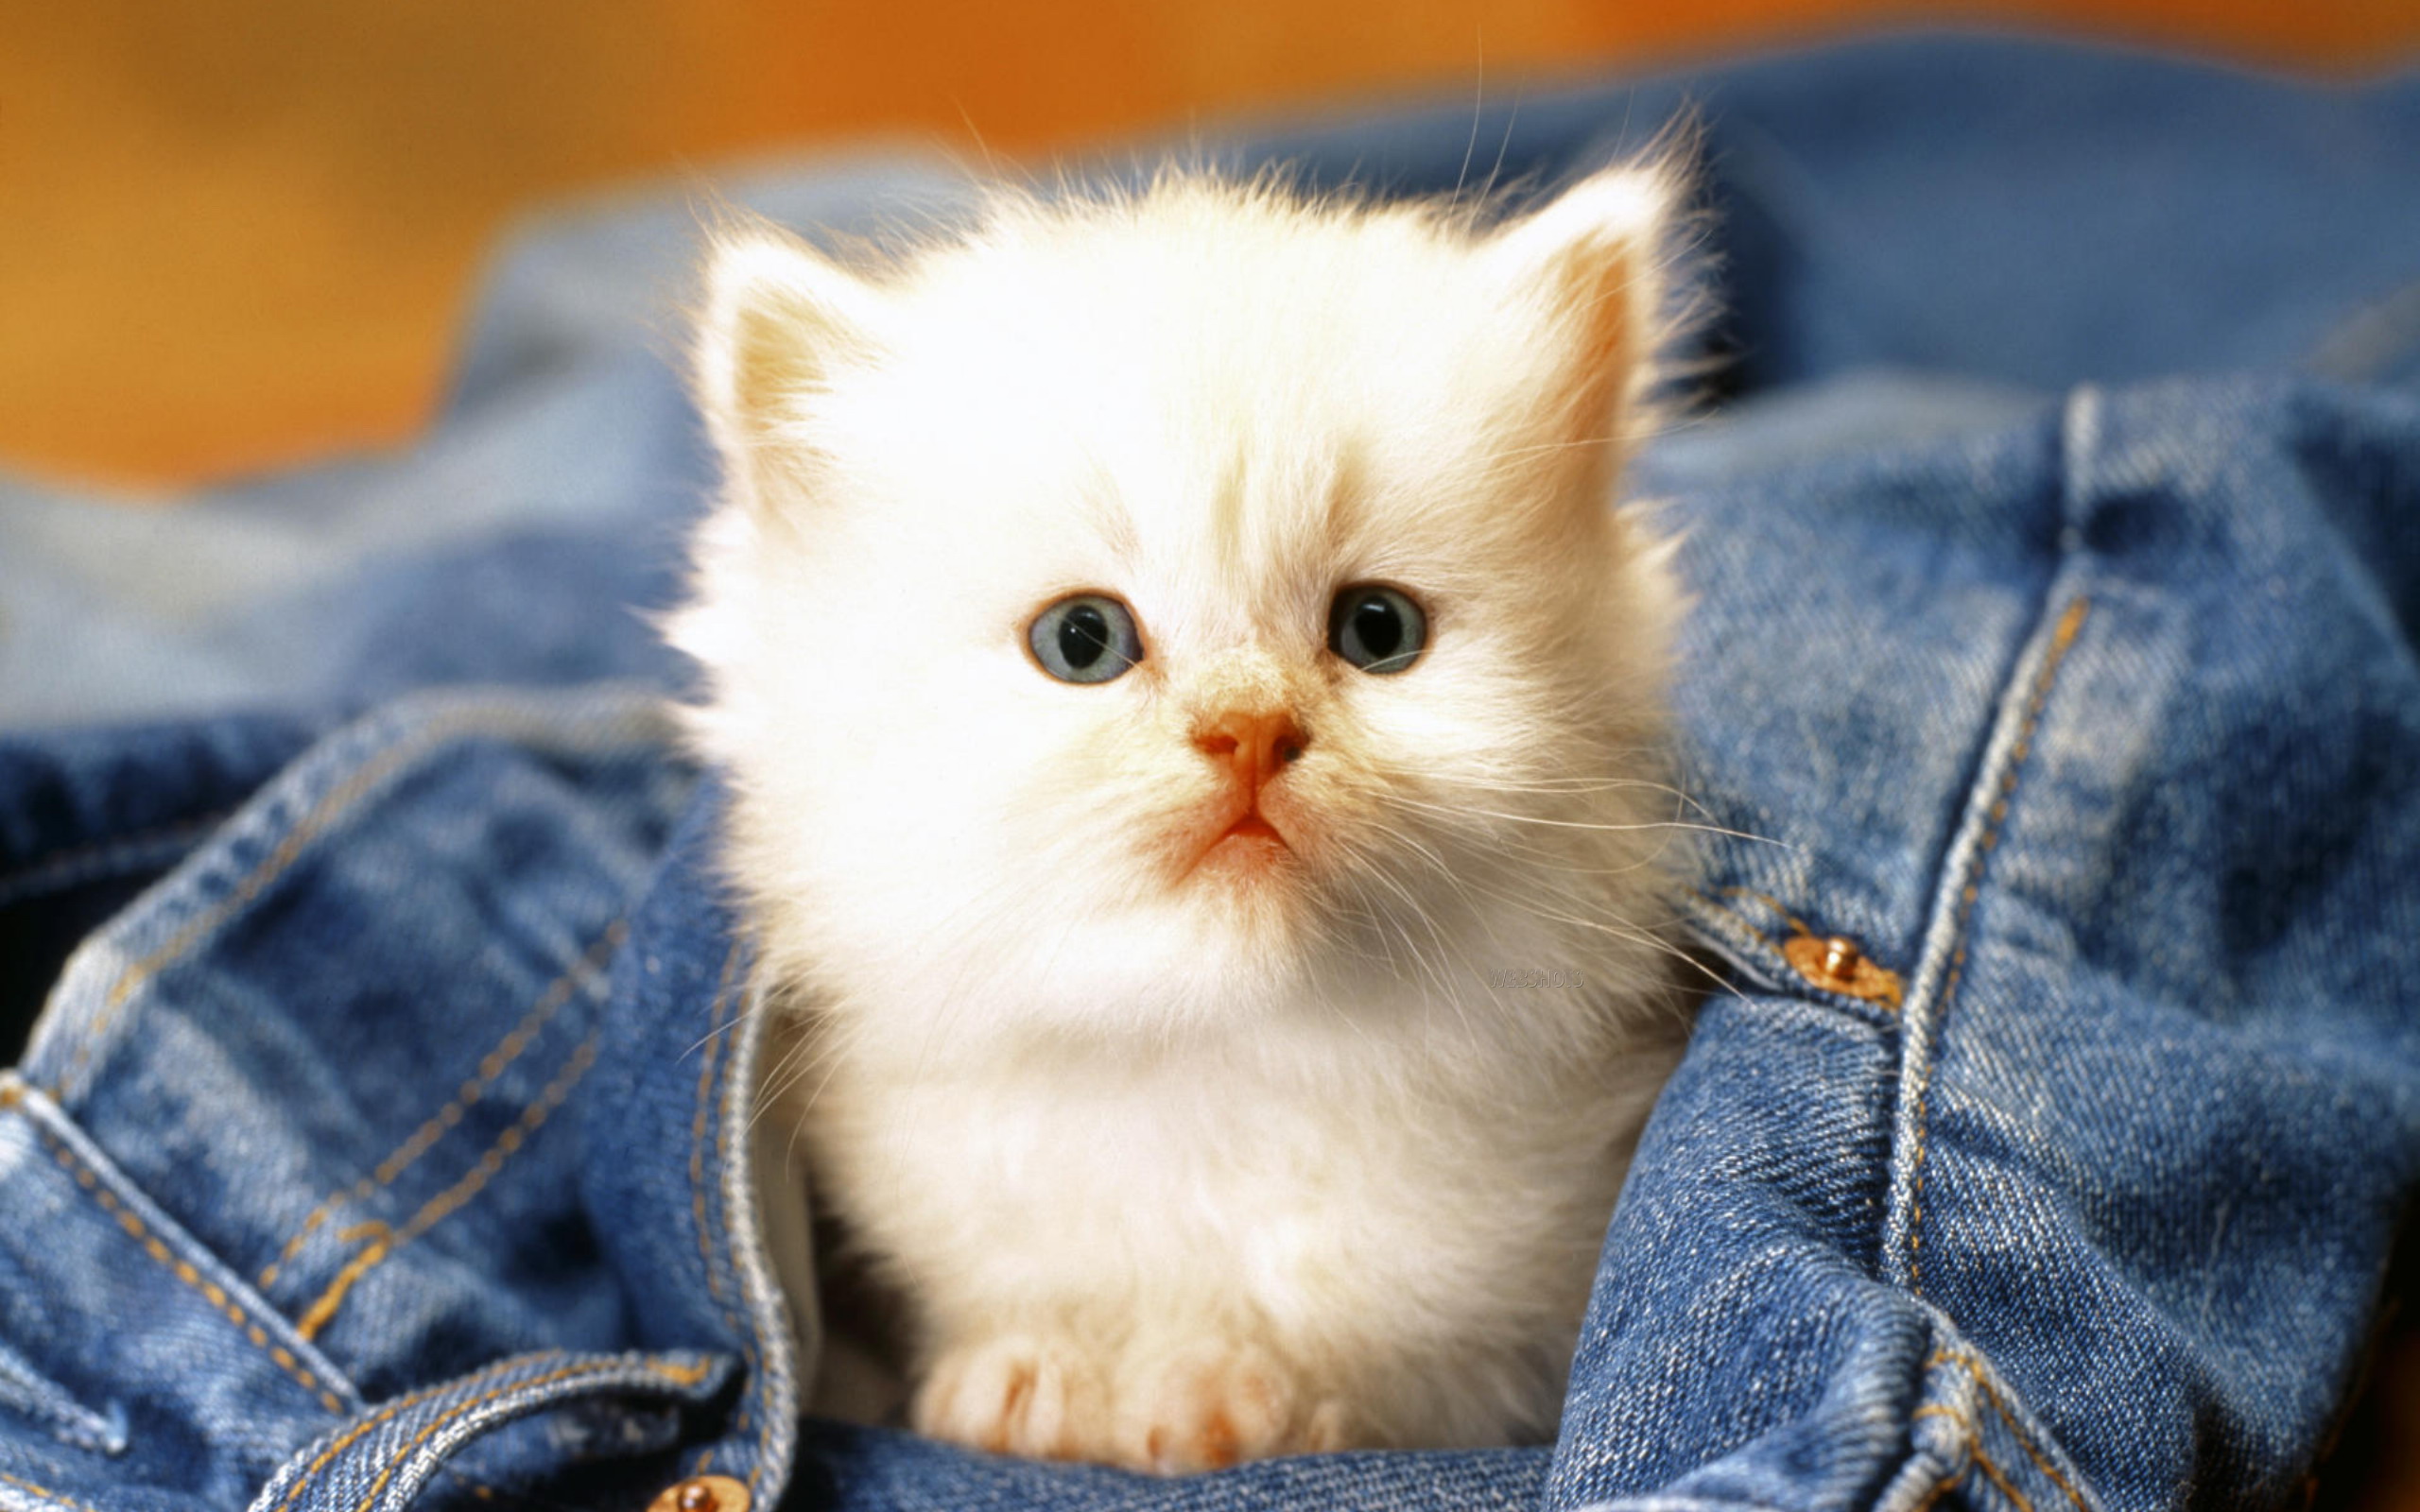  Cat Baby In Hd And Widescreen Resolutions Wallpaper Full HD